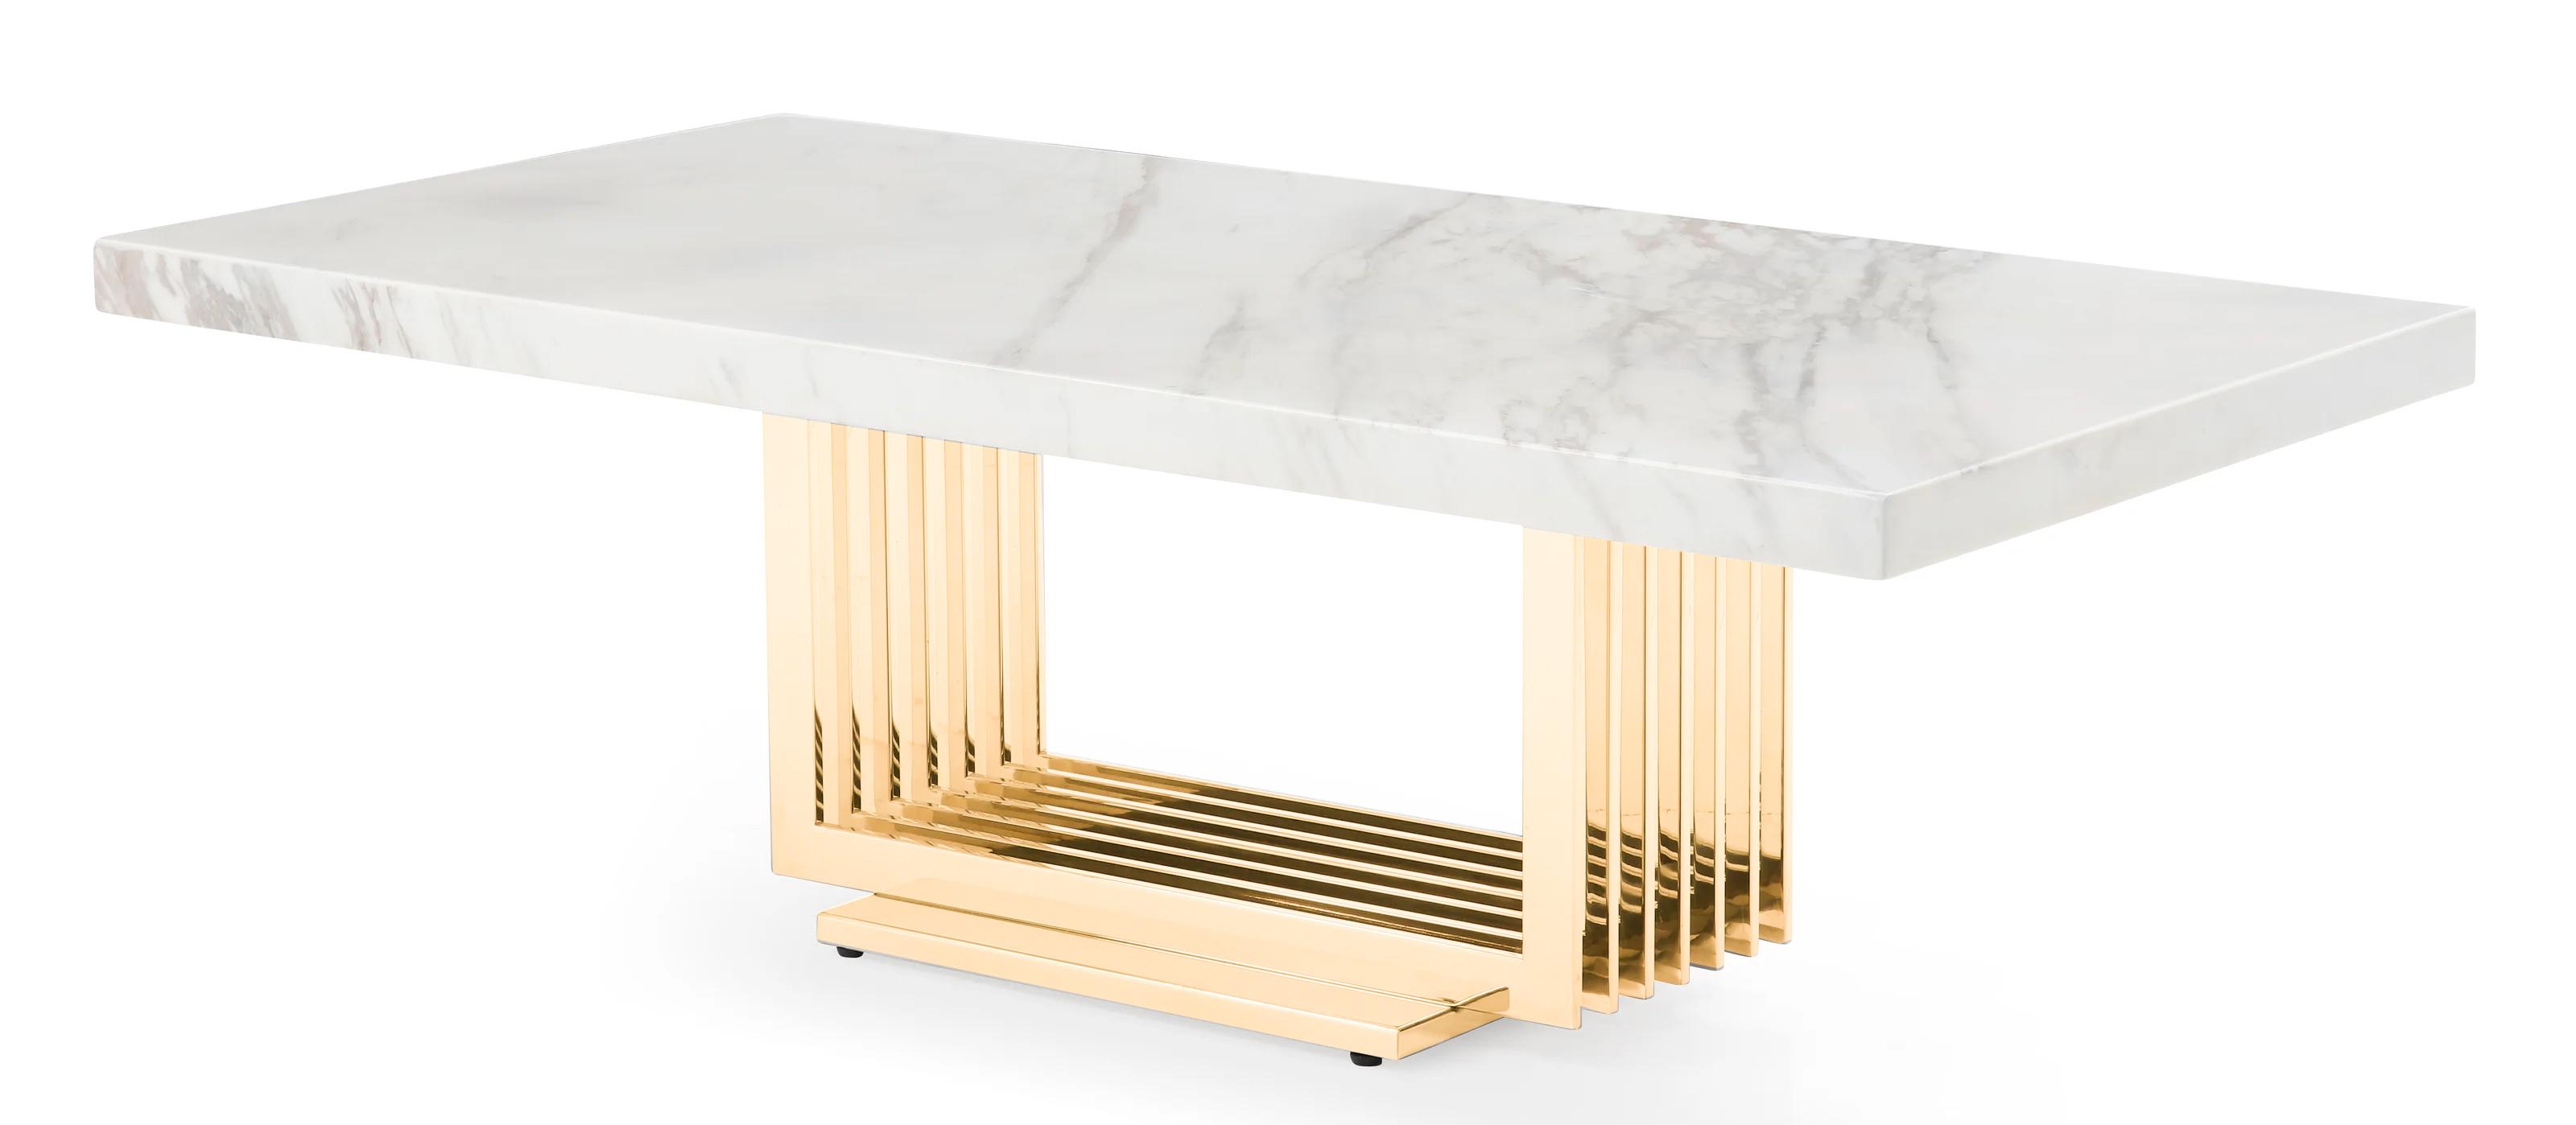 Contemporary, Modern Coffee Table Kingsley VGVCCT8933 in White, Gold 